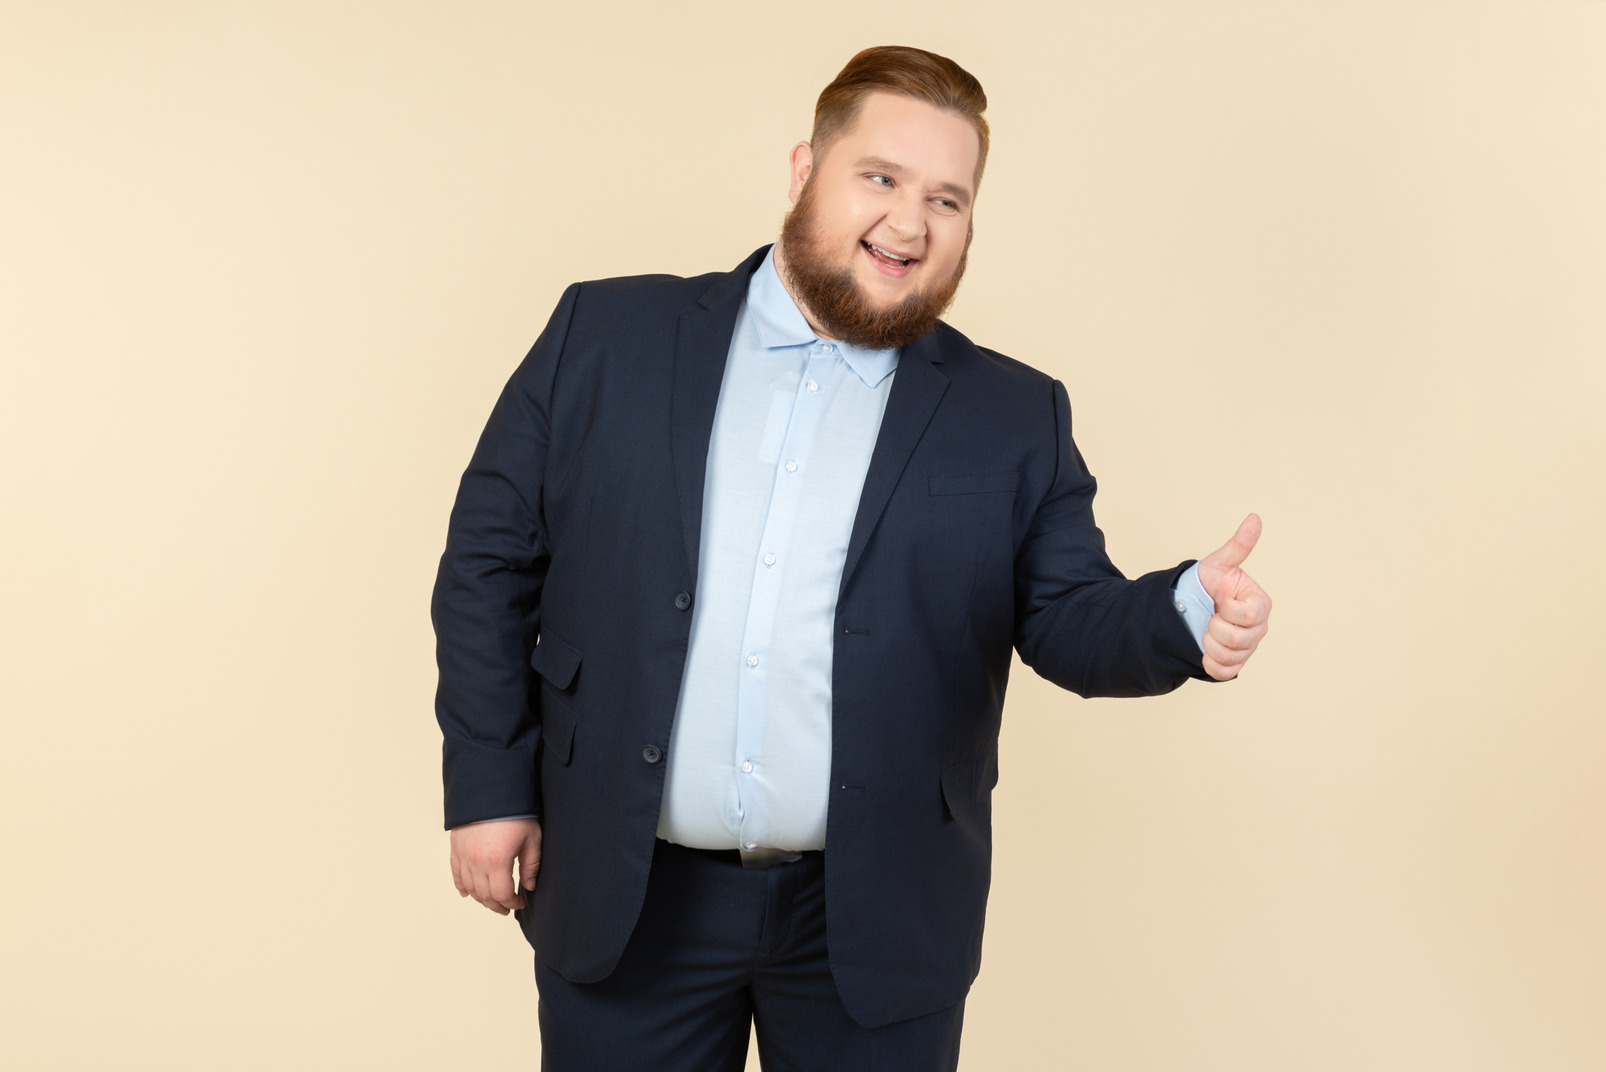 Young overweight man in suit showing thumb up